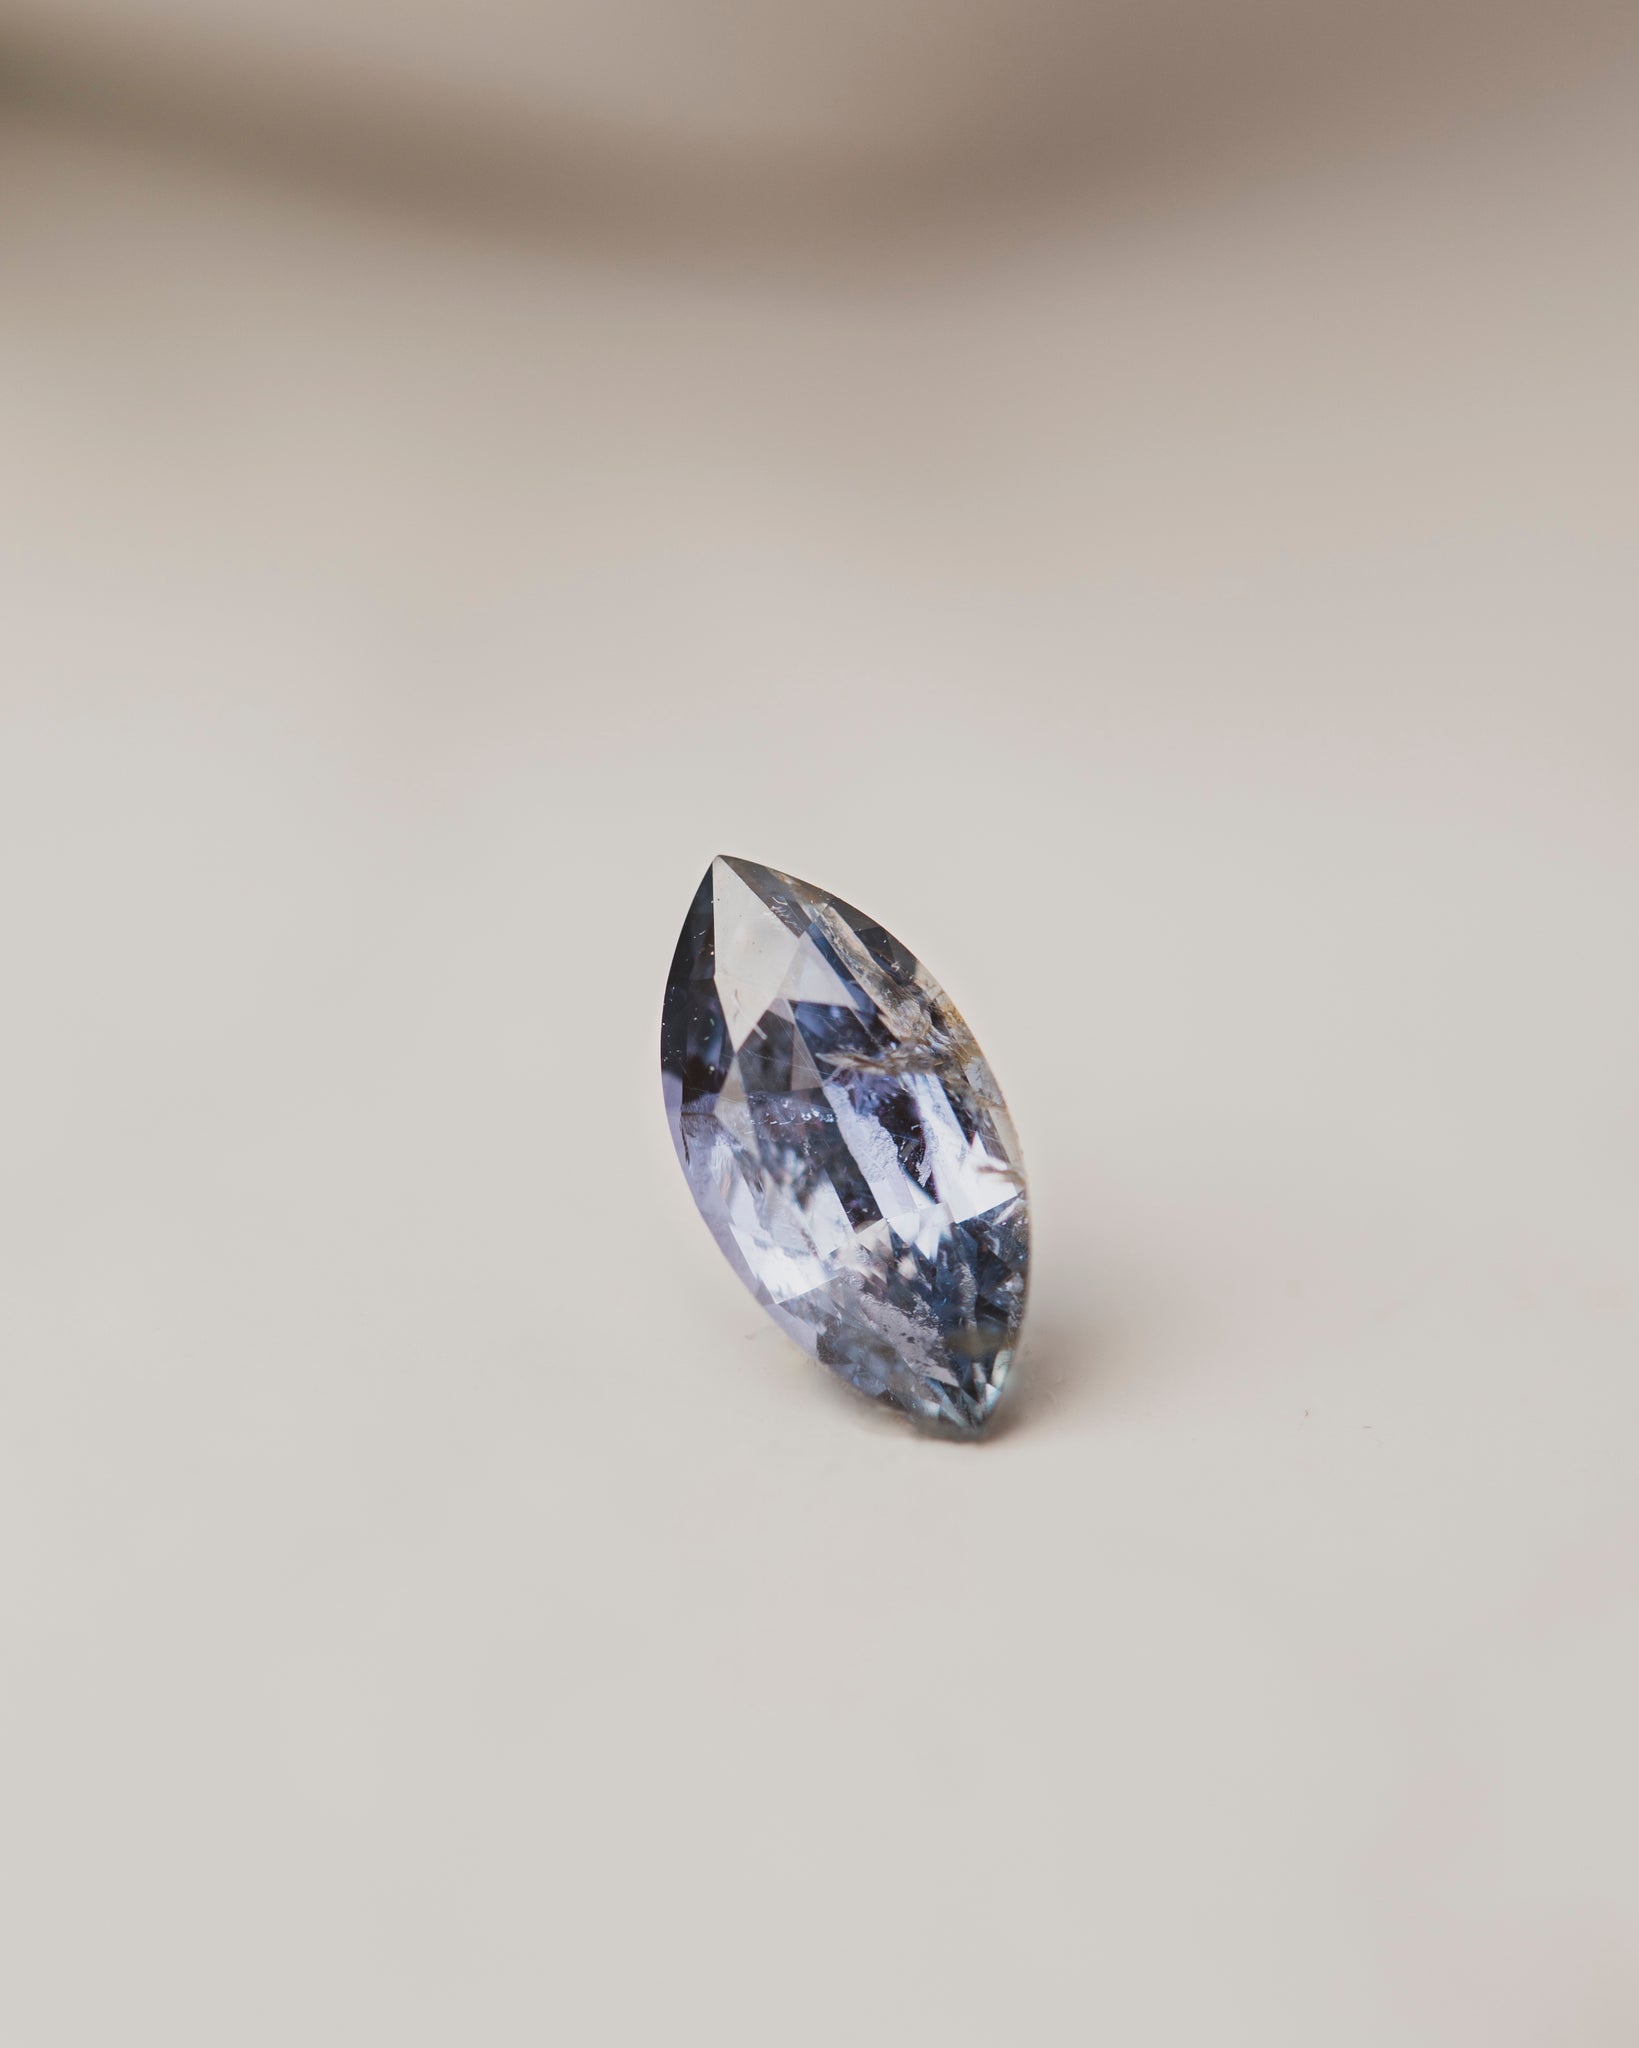 This 1.2 carat Marquise Umba Sapphire is very rare shade of purple, perfect for a custom design project